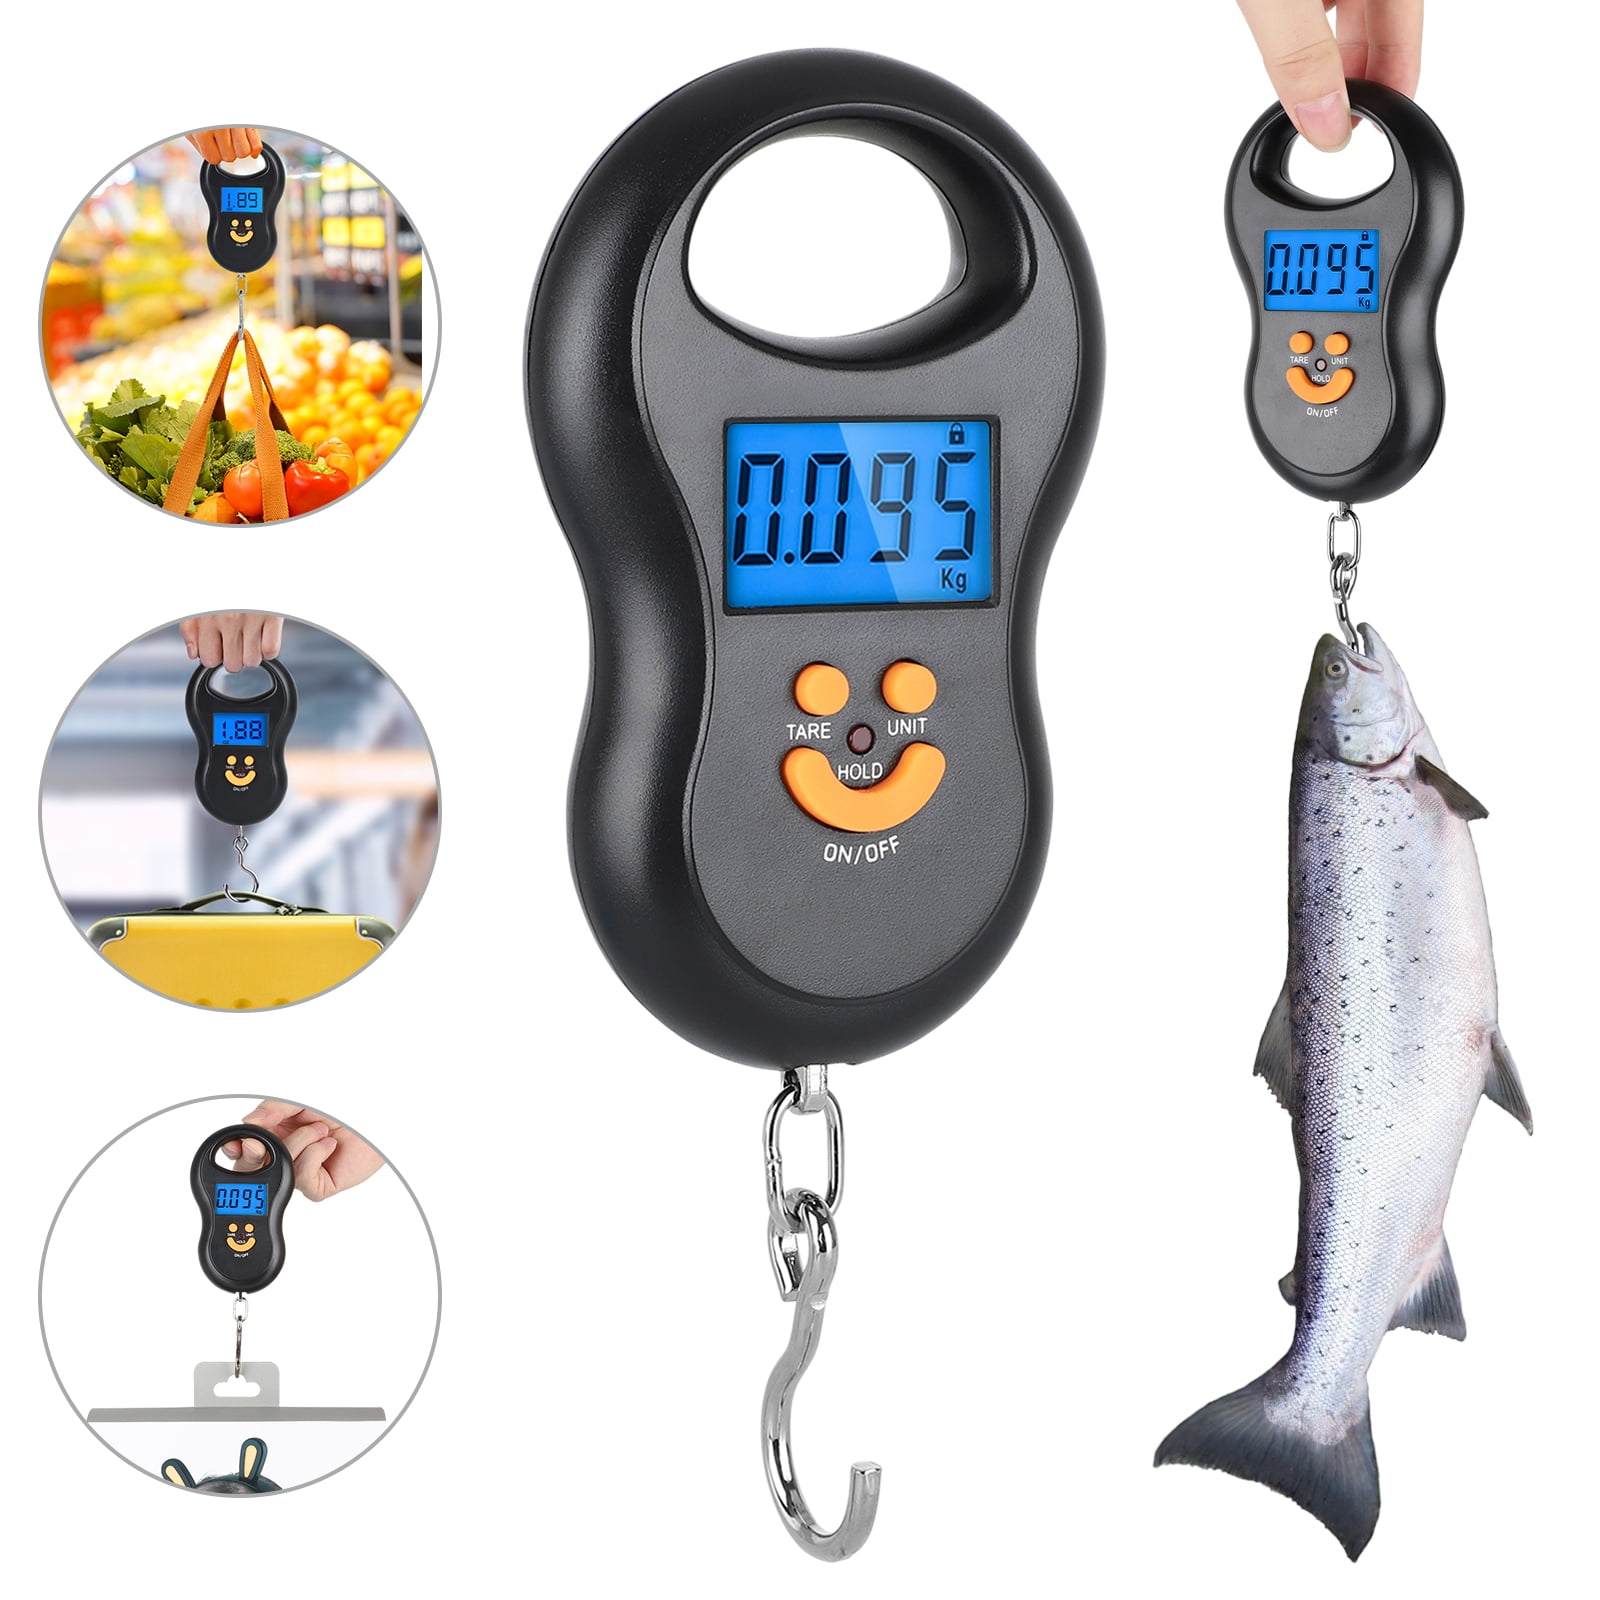 DIGITAL ELECTRONIC CARP FISHING WEIGHING SCALES 110lb/50kg Applied Specialized